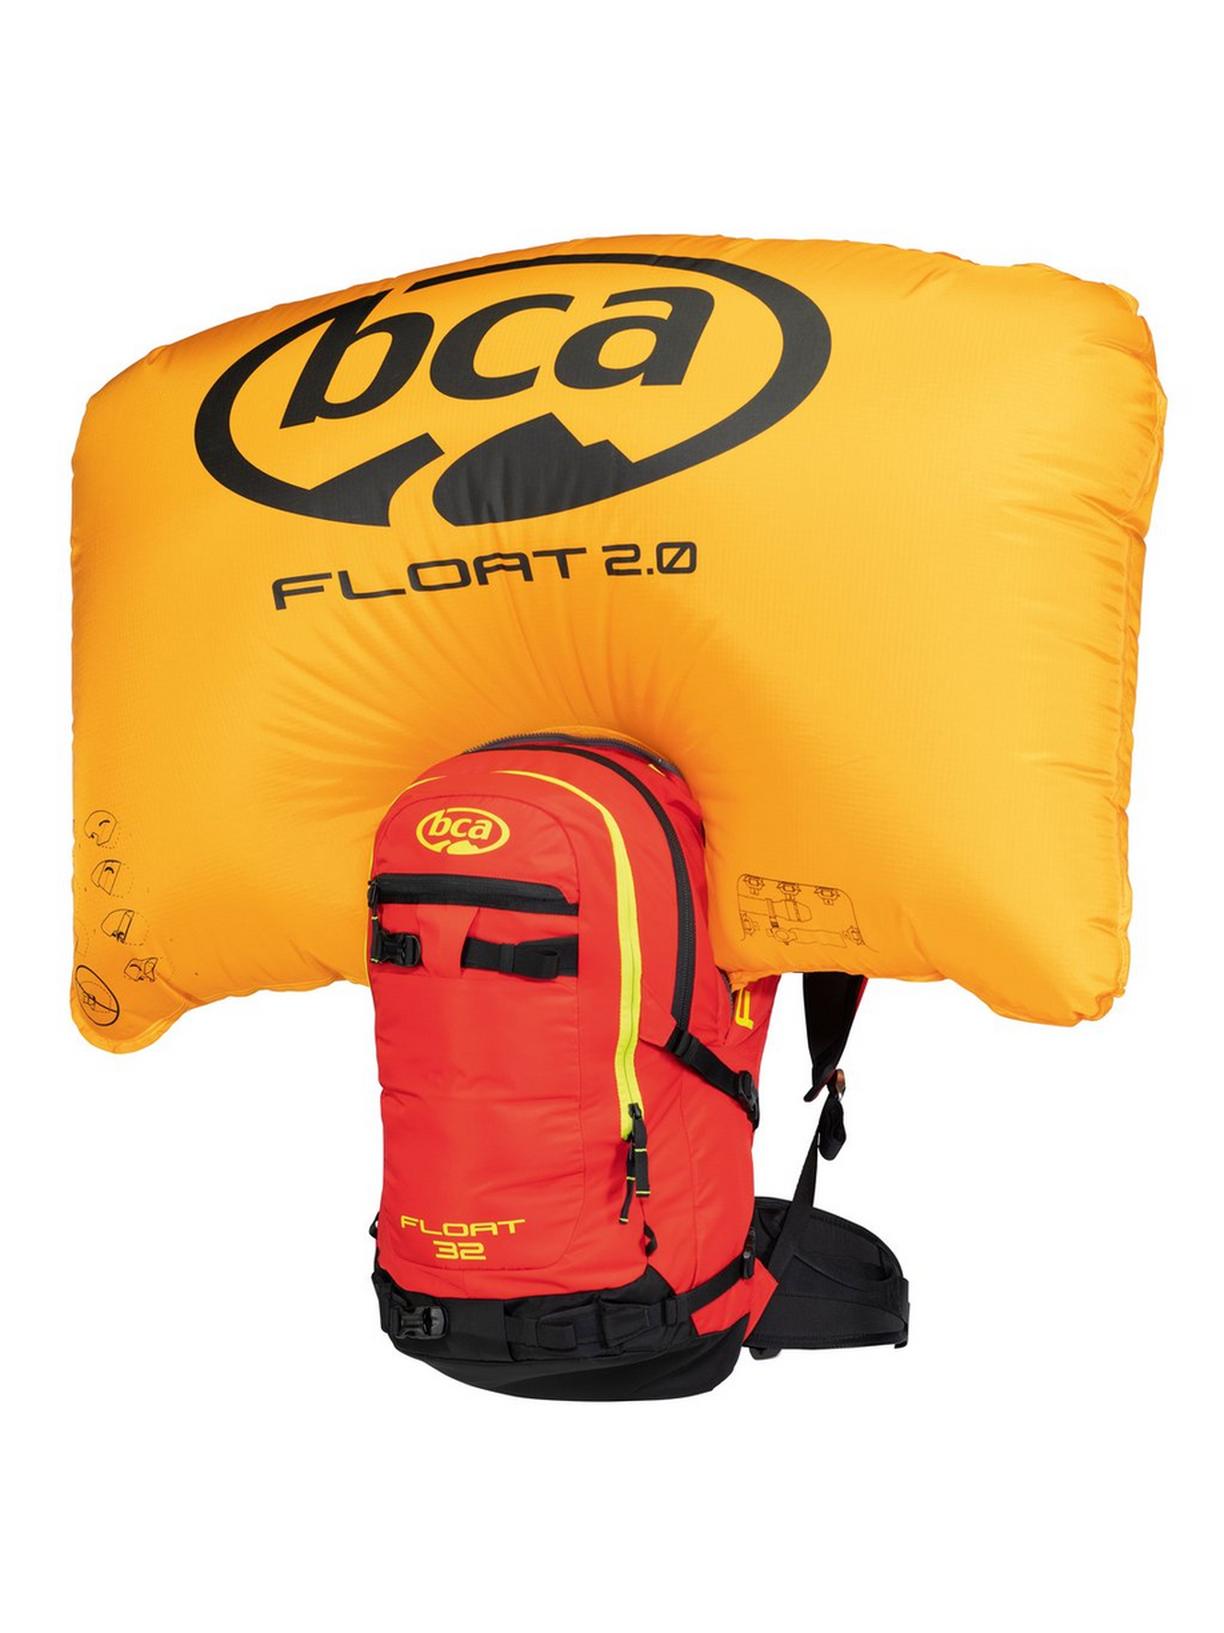 BCA Float 32 Avalanche Airbag 2.0 - Ascent Outdoors LLC